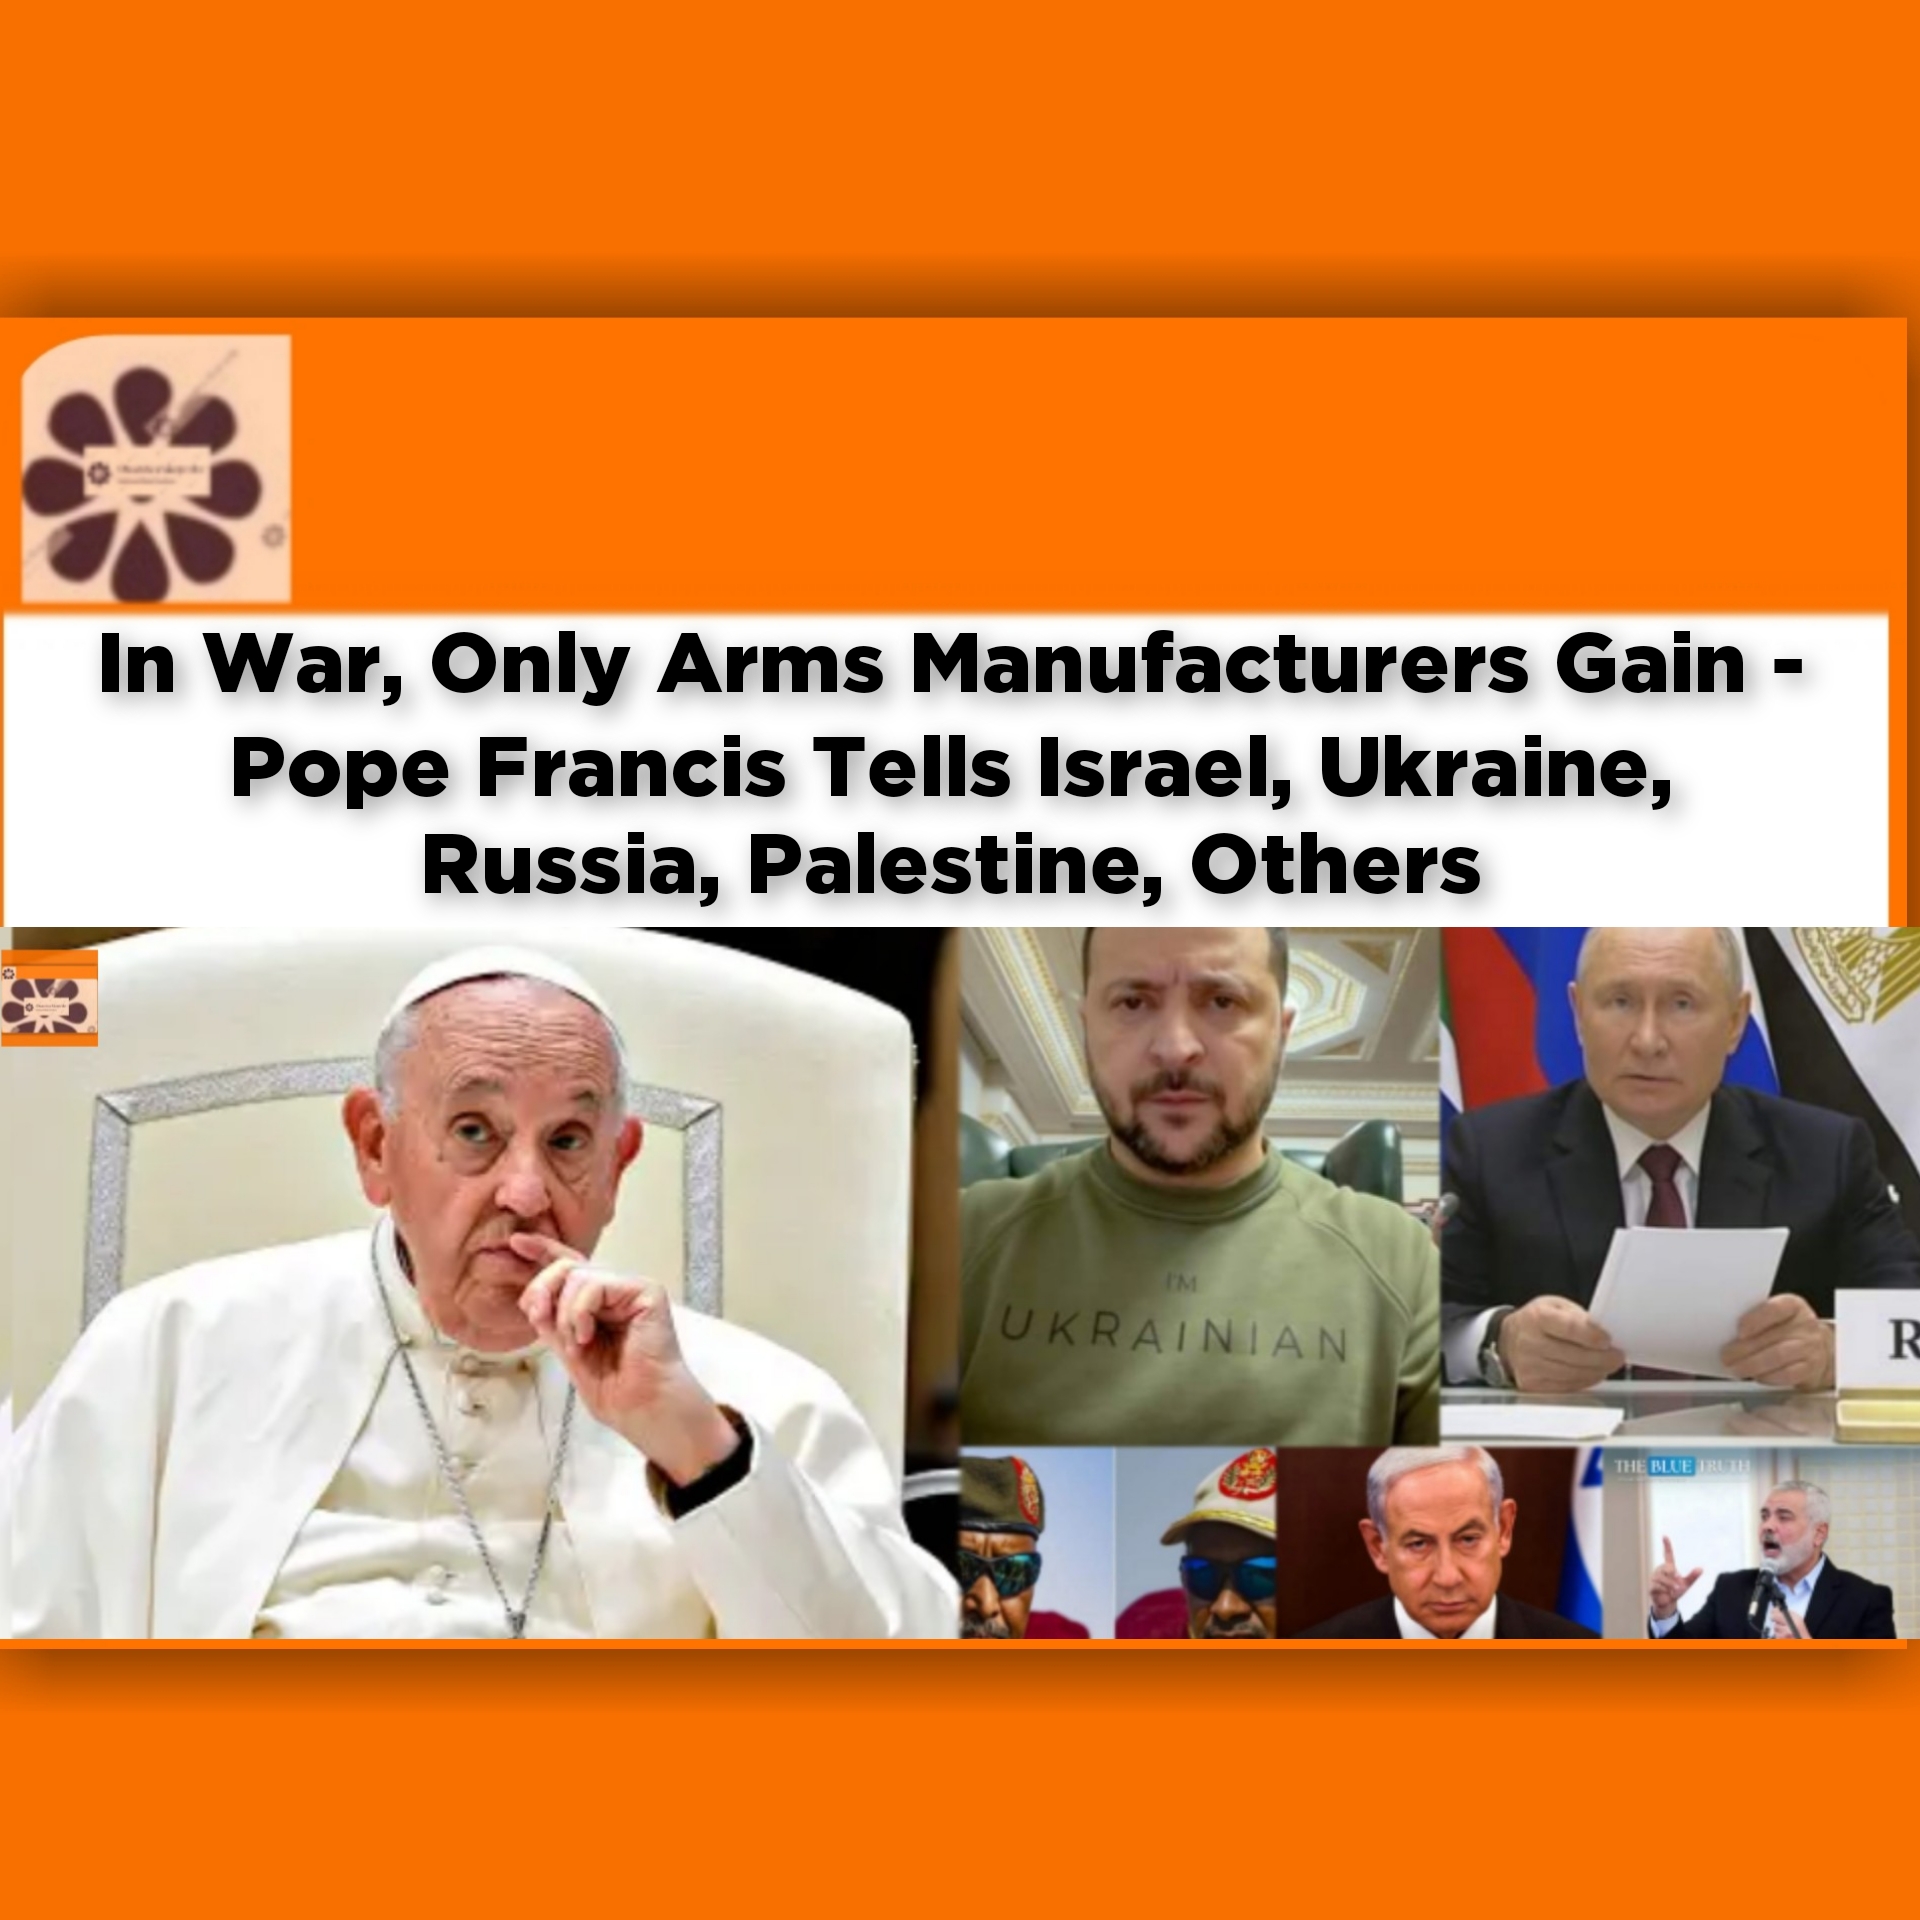 In War, Only Arms Manufacturers Gain - Pope Francis Tells Israel, Ukraine, Russia, Palestine, Others ~ OsazuwaAkonedo #Peter